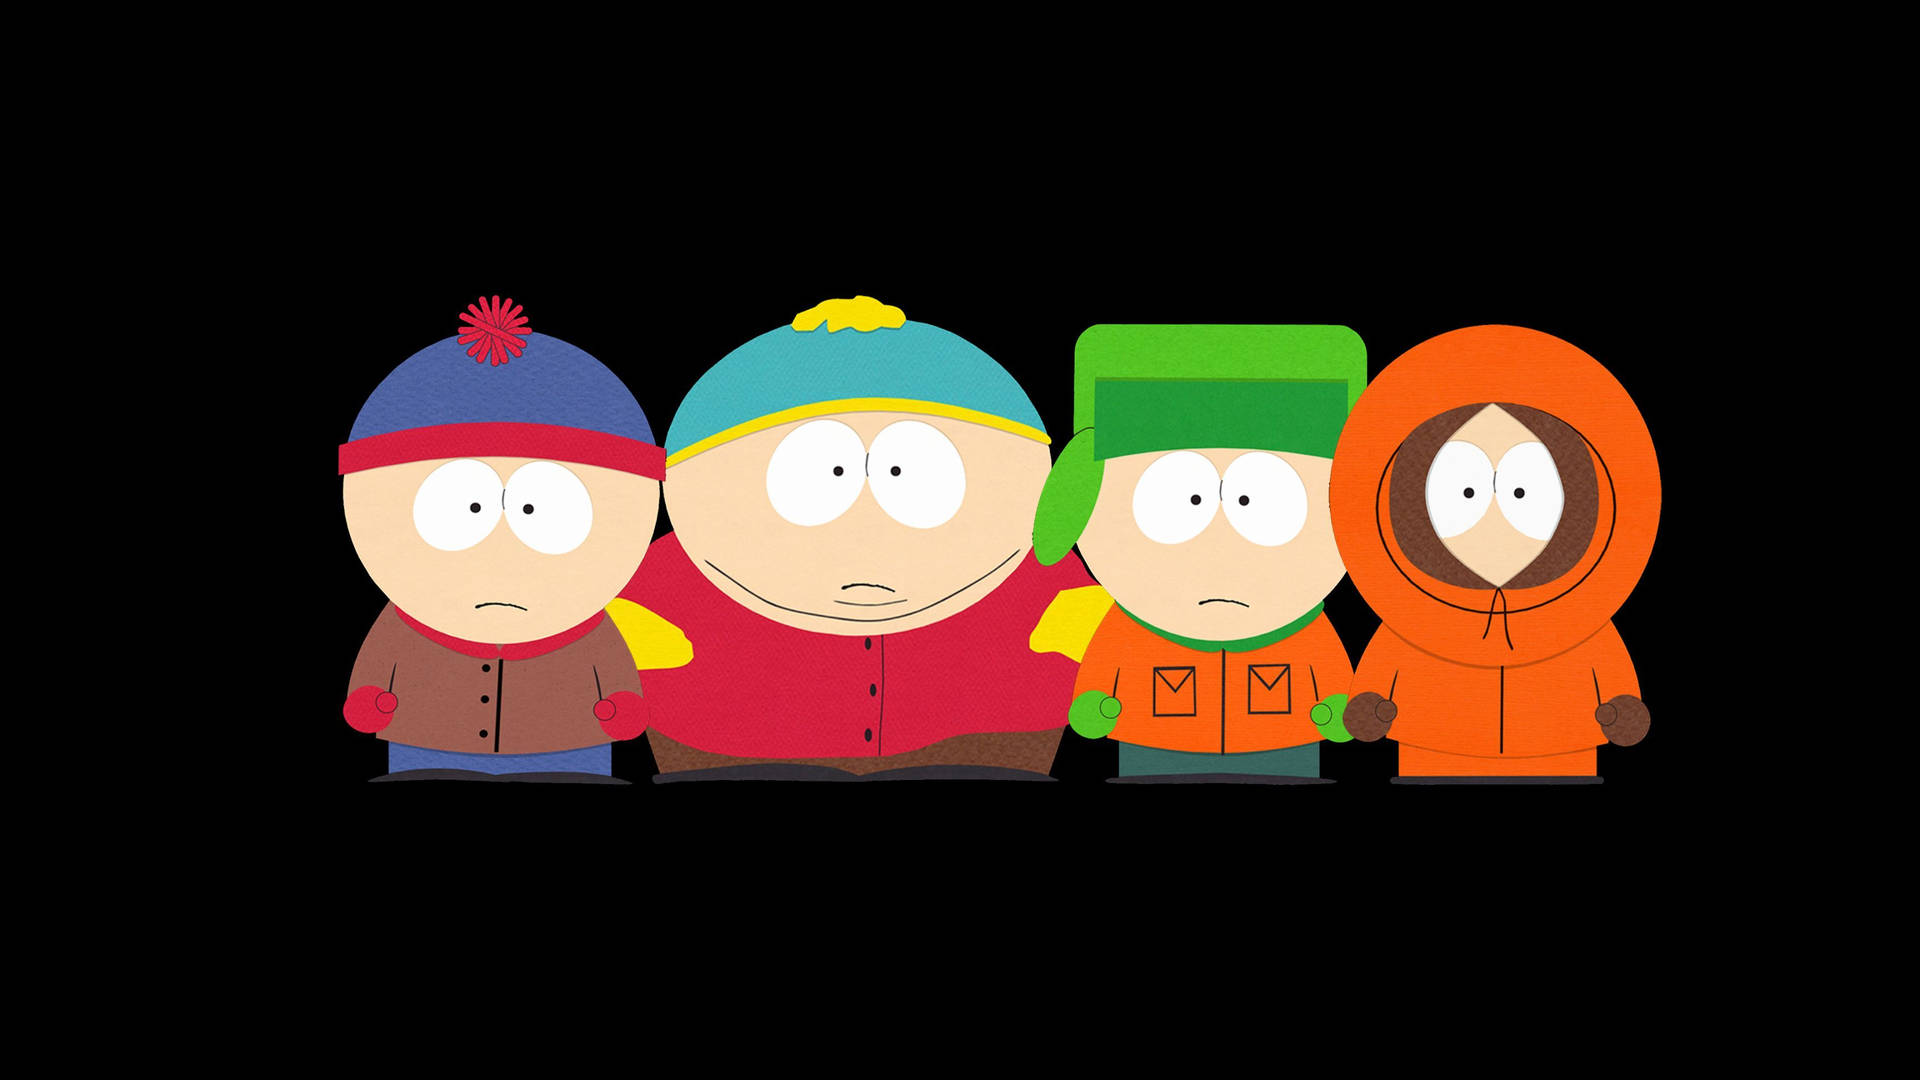 South Park Art With Dark Backdrop Background